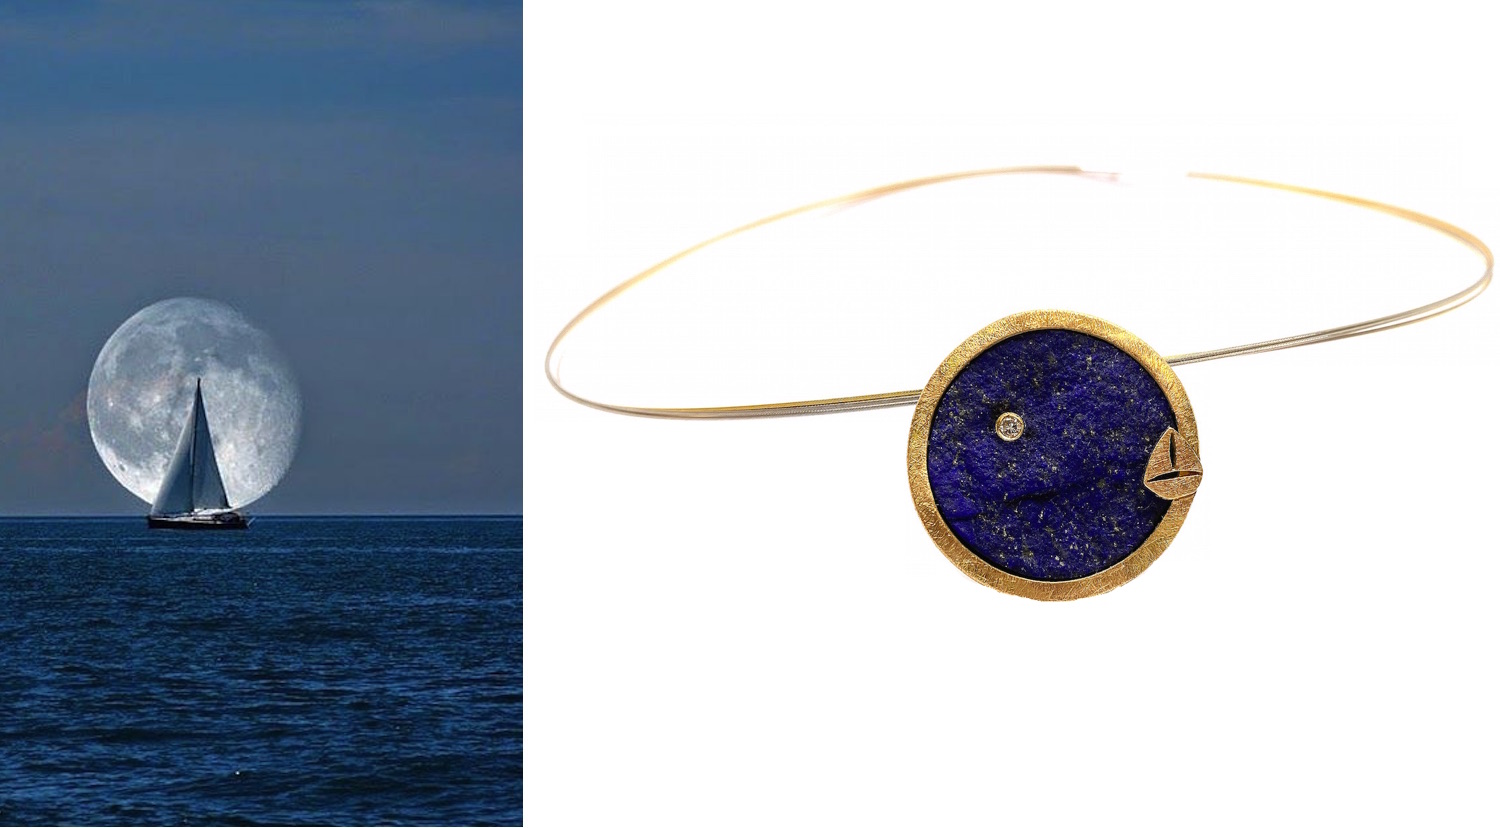 "jewels of the sea" round rough lapislazuli pendant in silver and gold